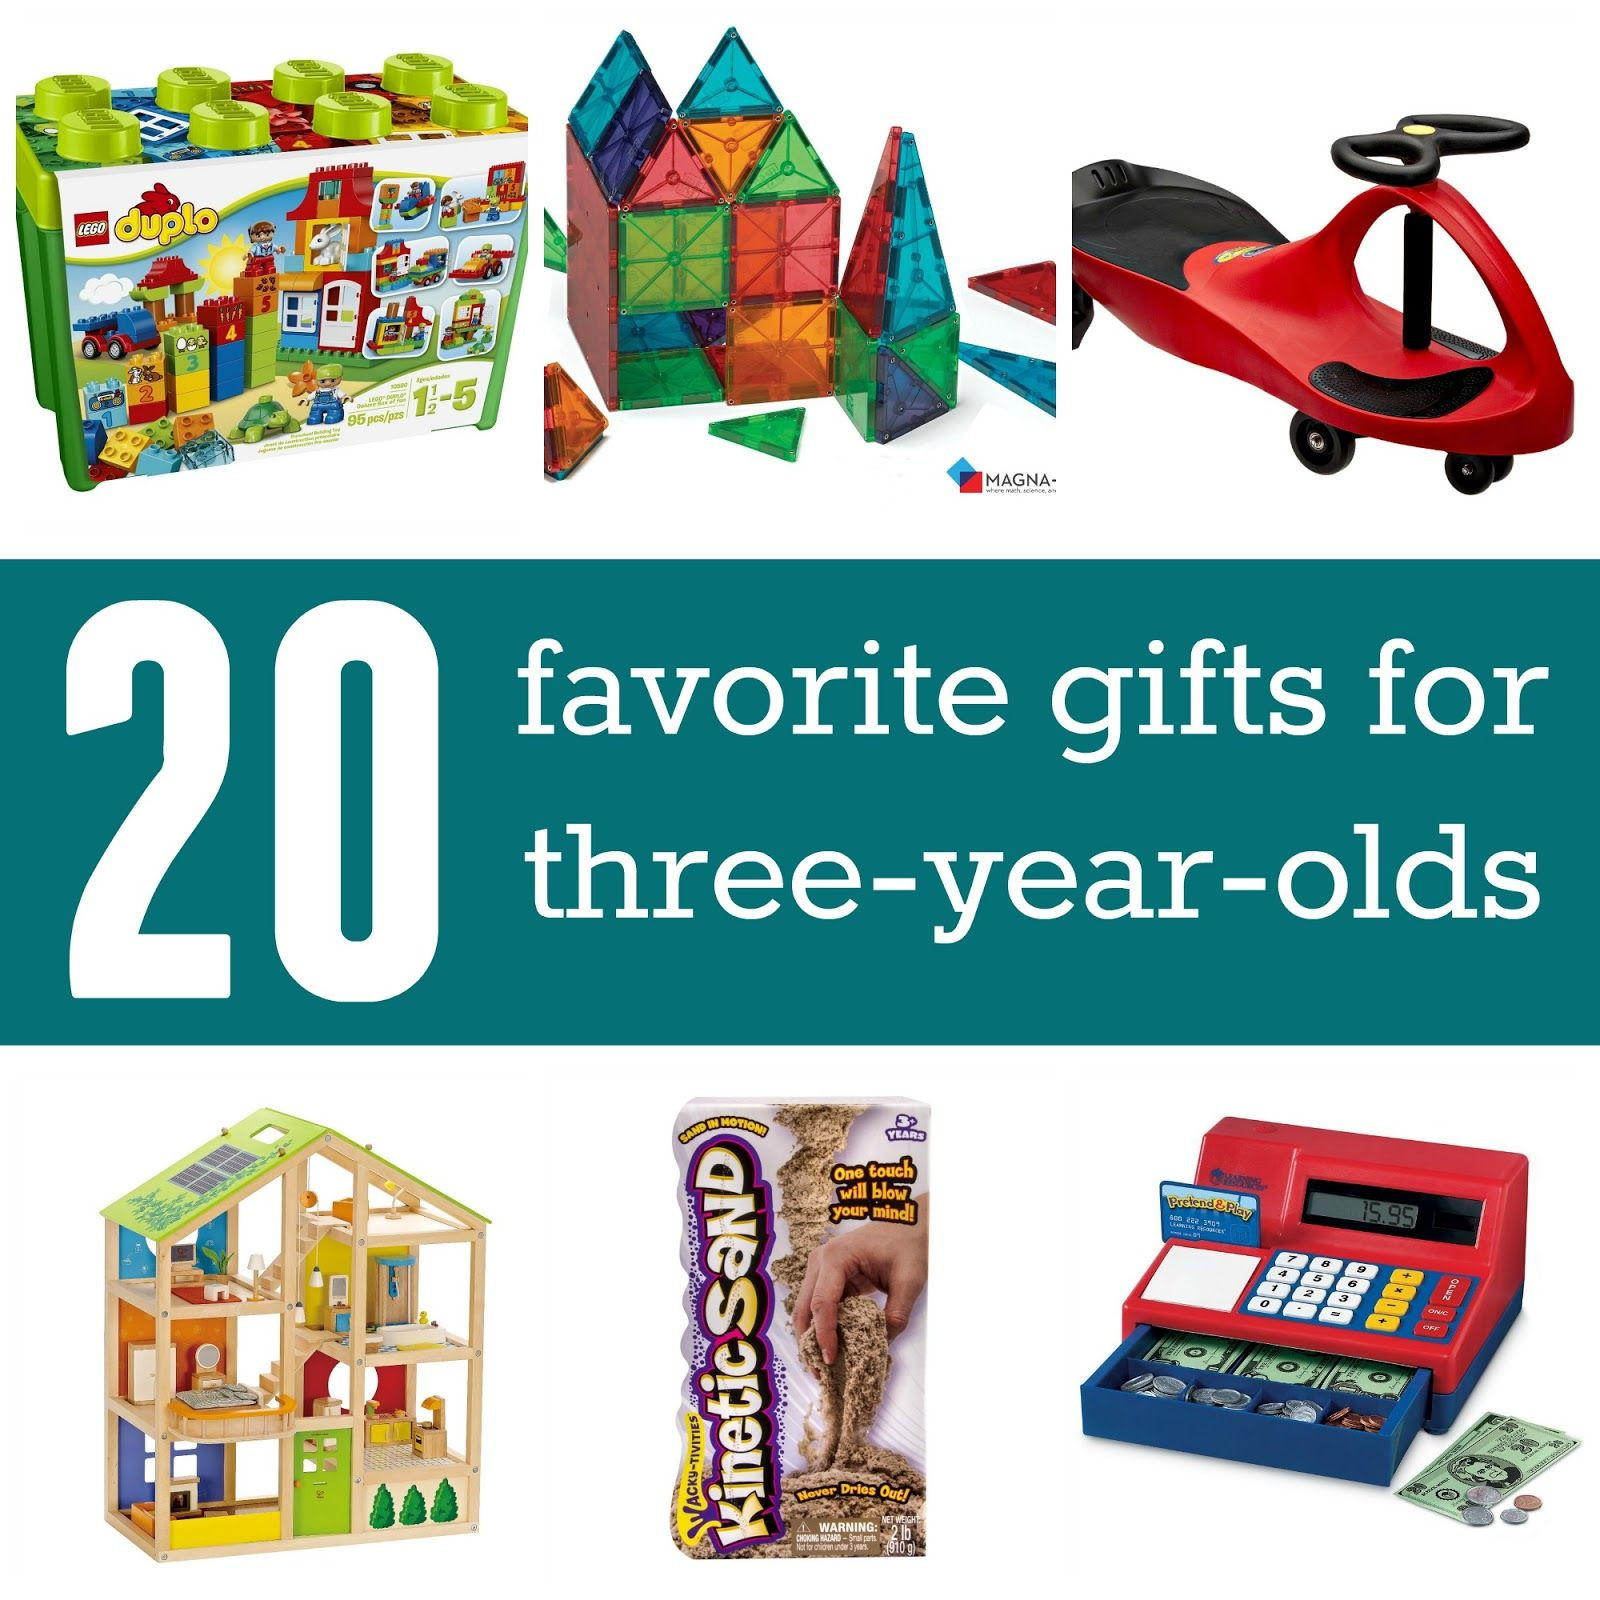 3 Year Old Boy Birthday Gifts
 Favorite Gifts for 3 year olds